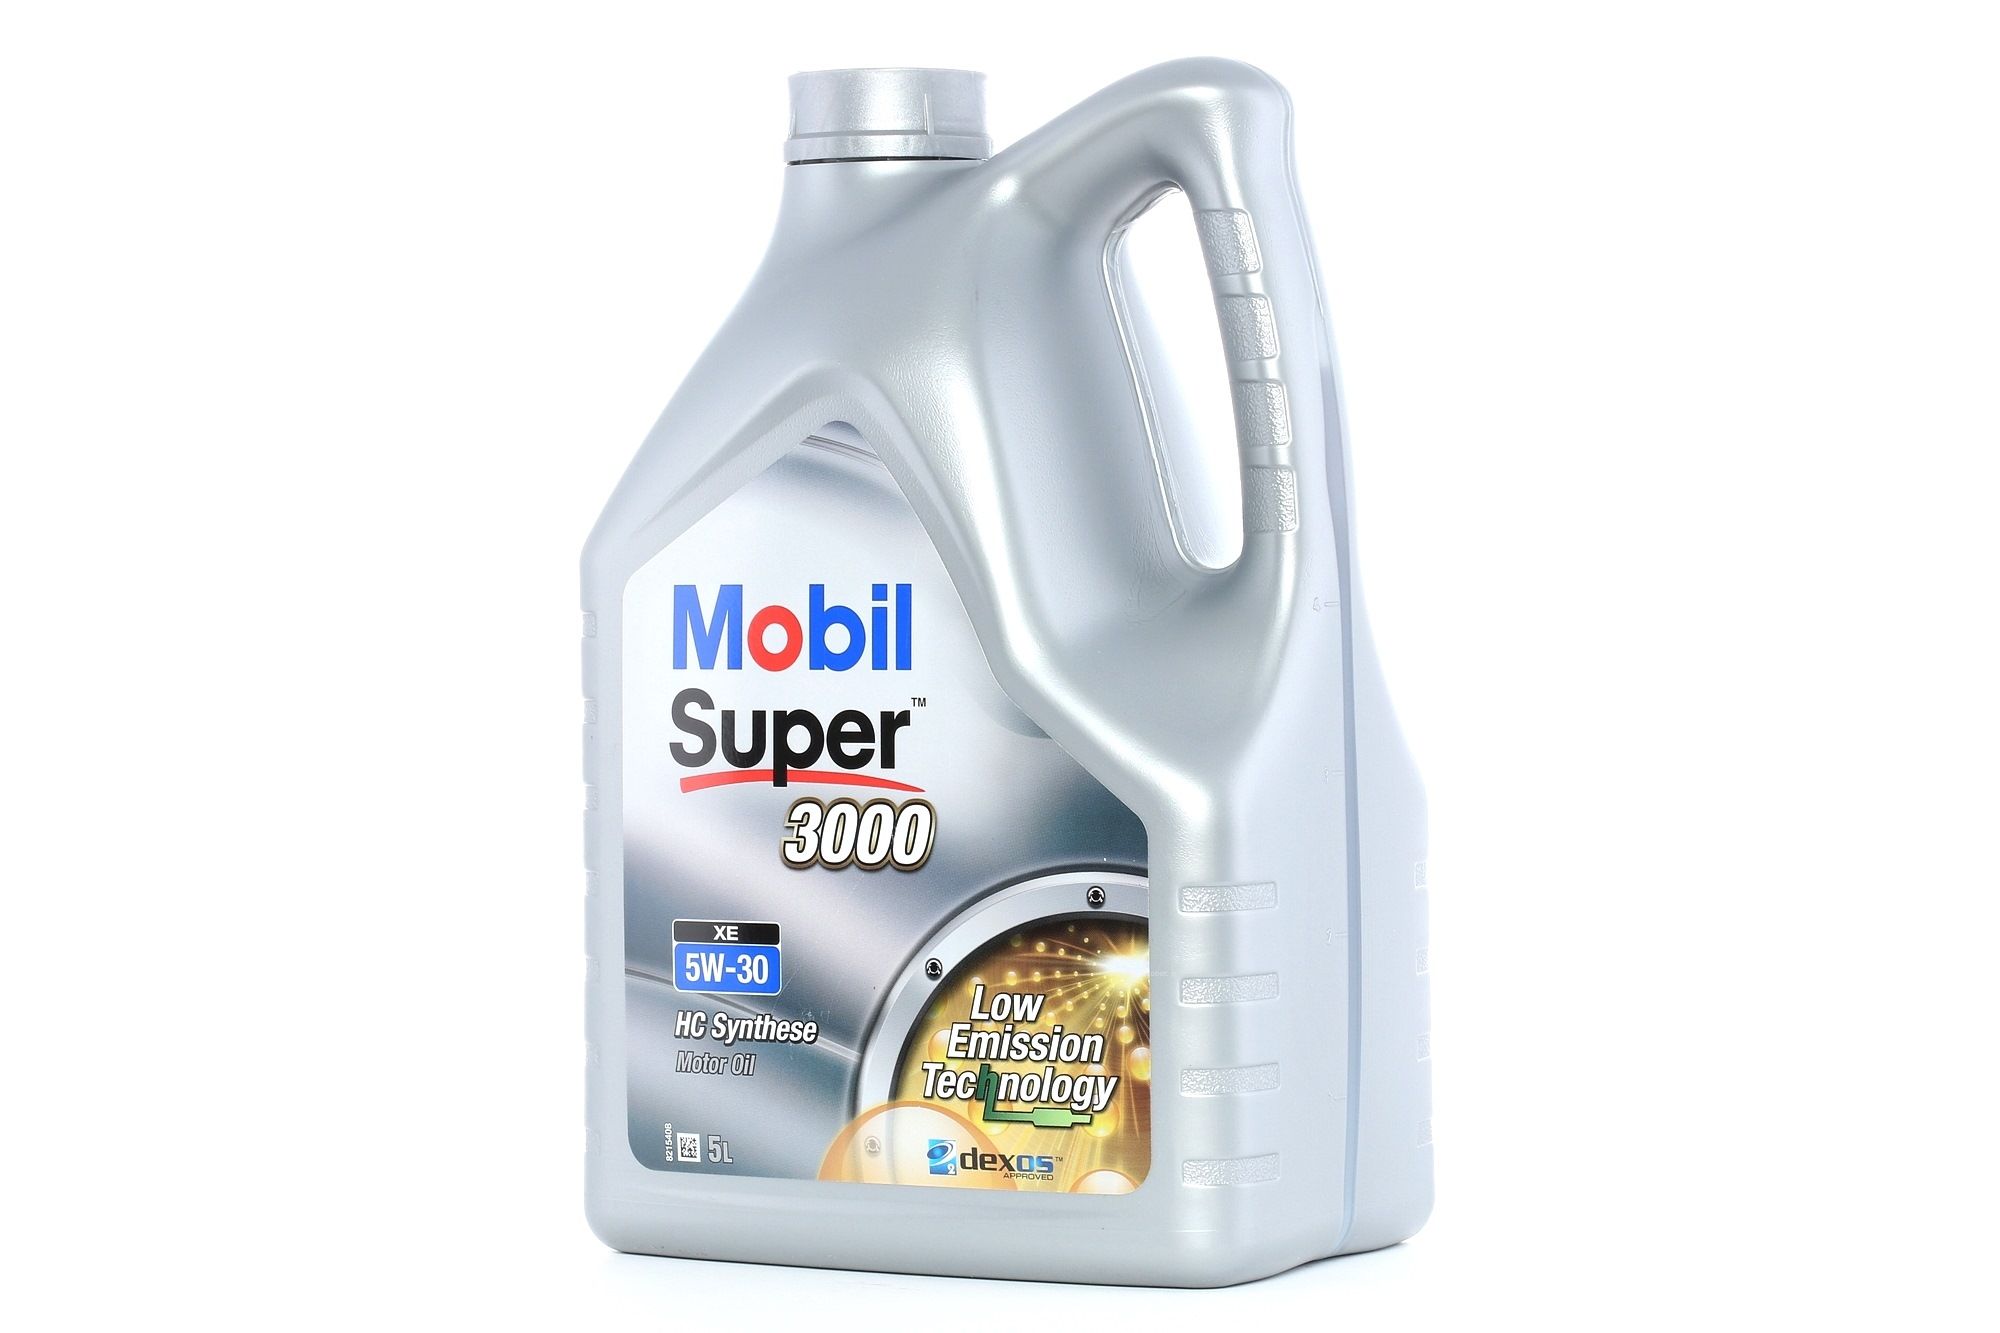 Olio motore 150944 MOBIL 5W-30 BMW Longlife-04 Super, 3000 XE